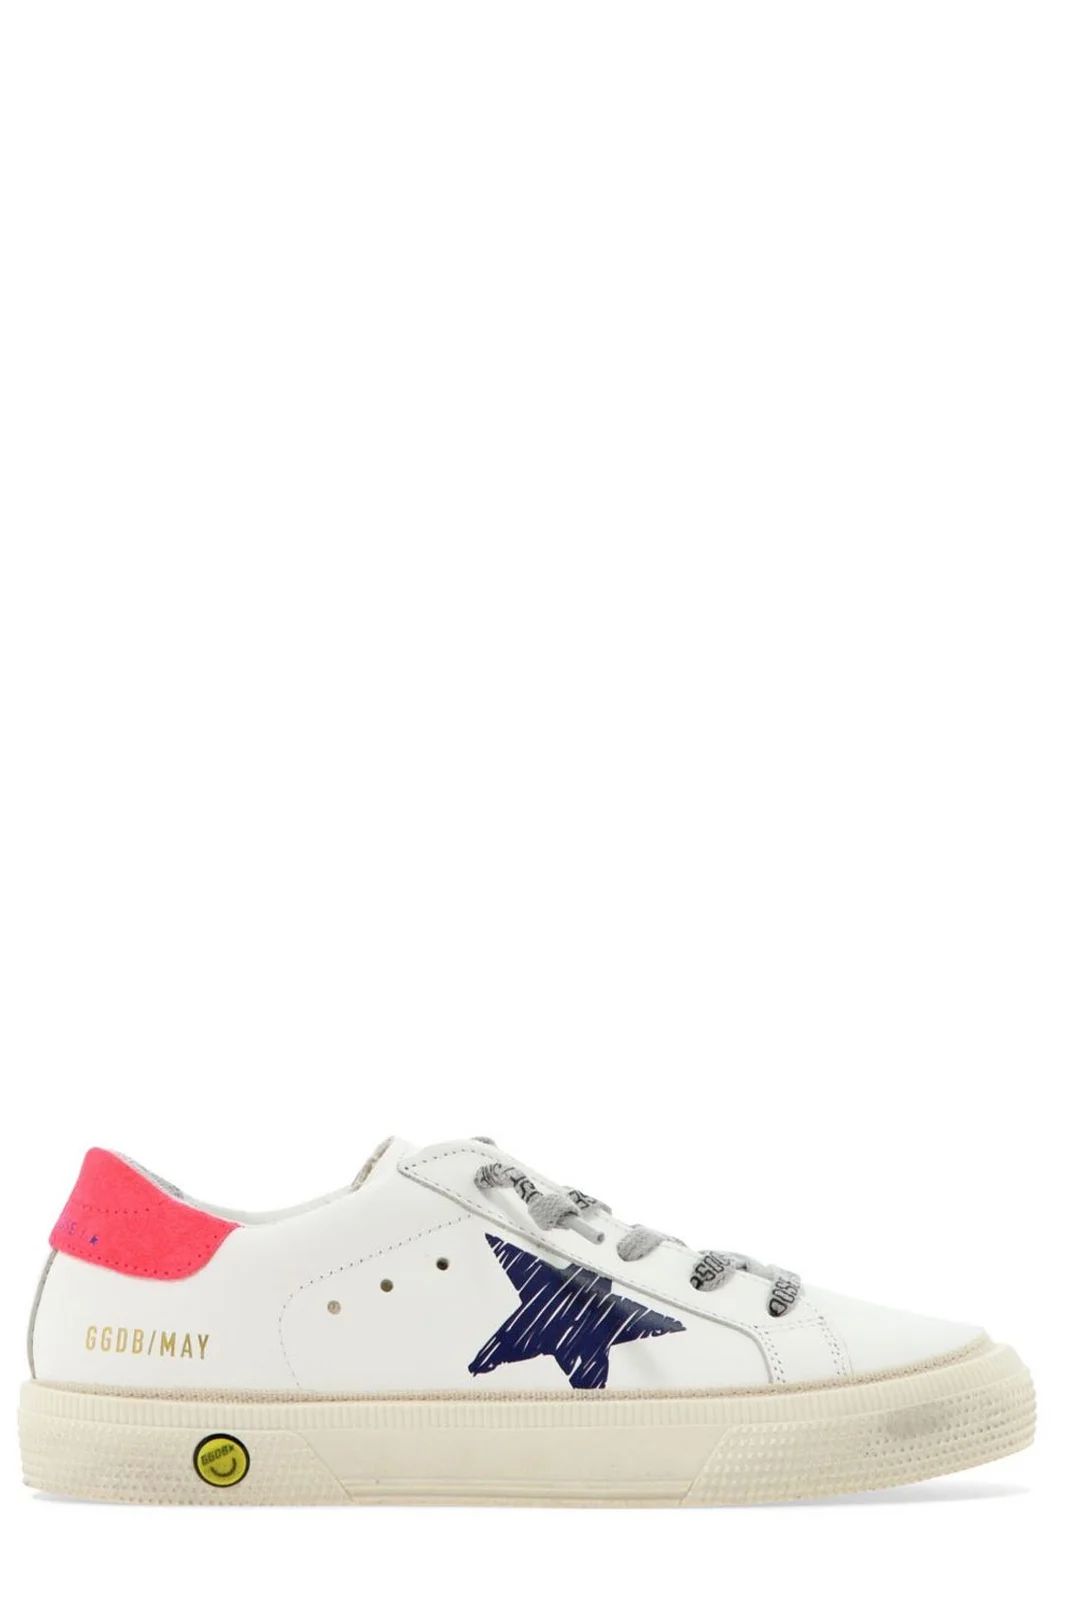 Golden Goose Kids Star-Print Lace-Up Sneakers | Cettire Global